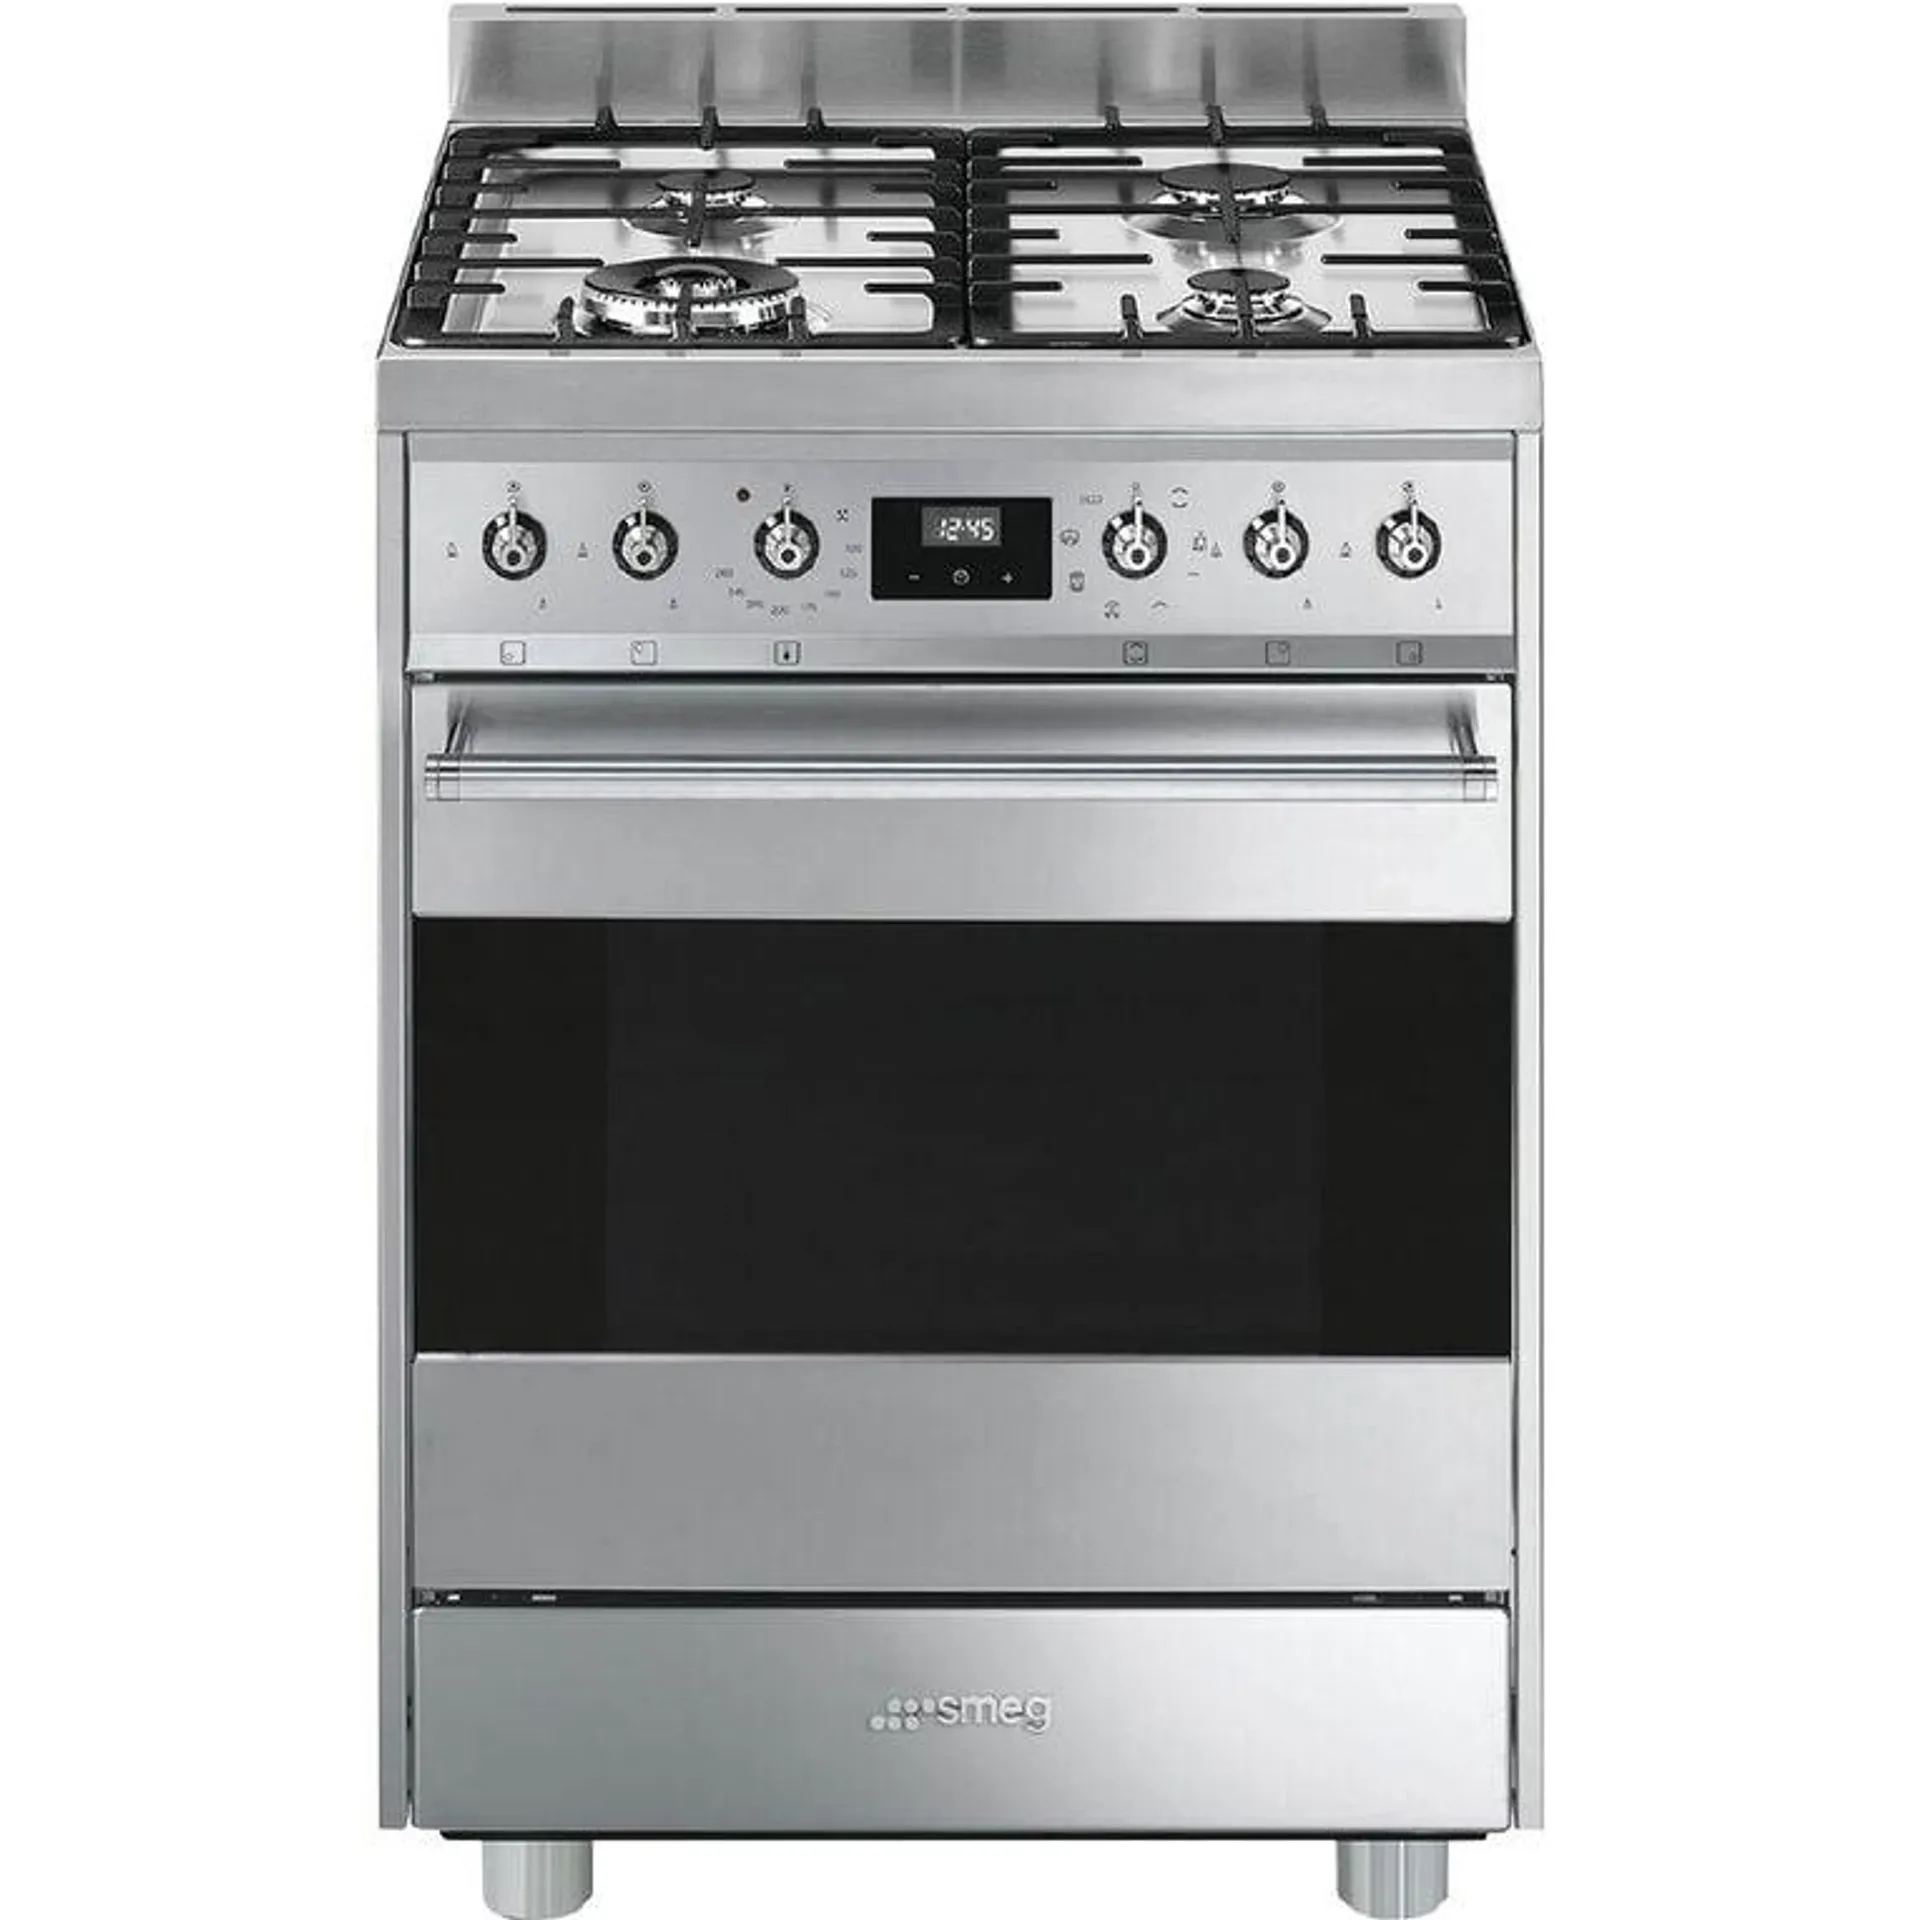 Smeg 60cm Freestanding Cooker with Gas Cooktop